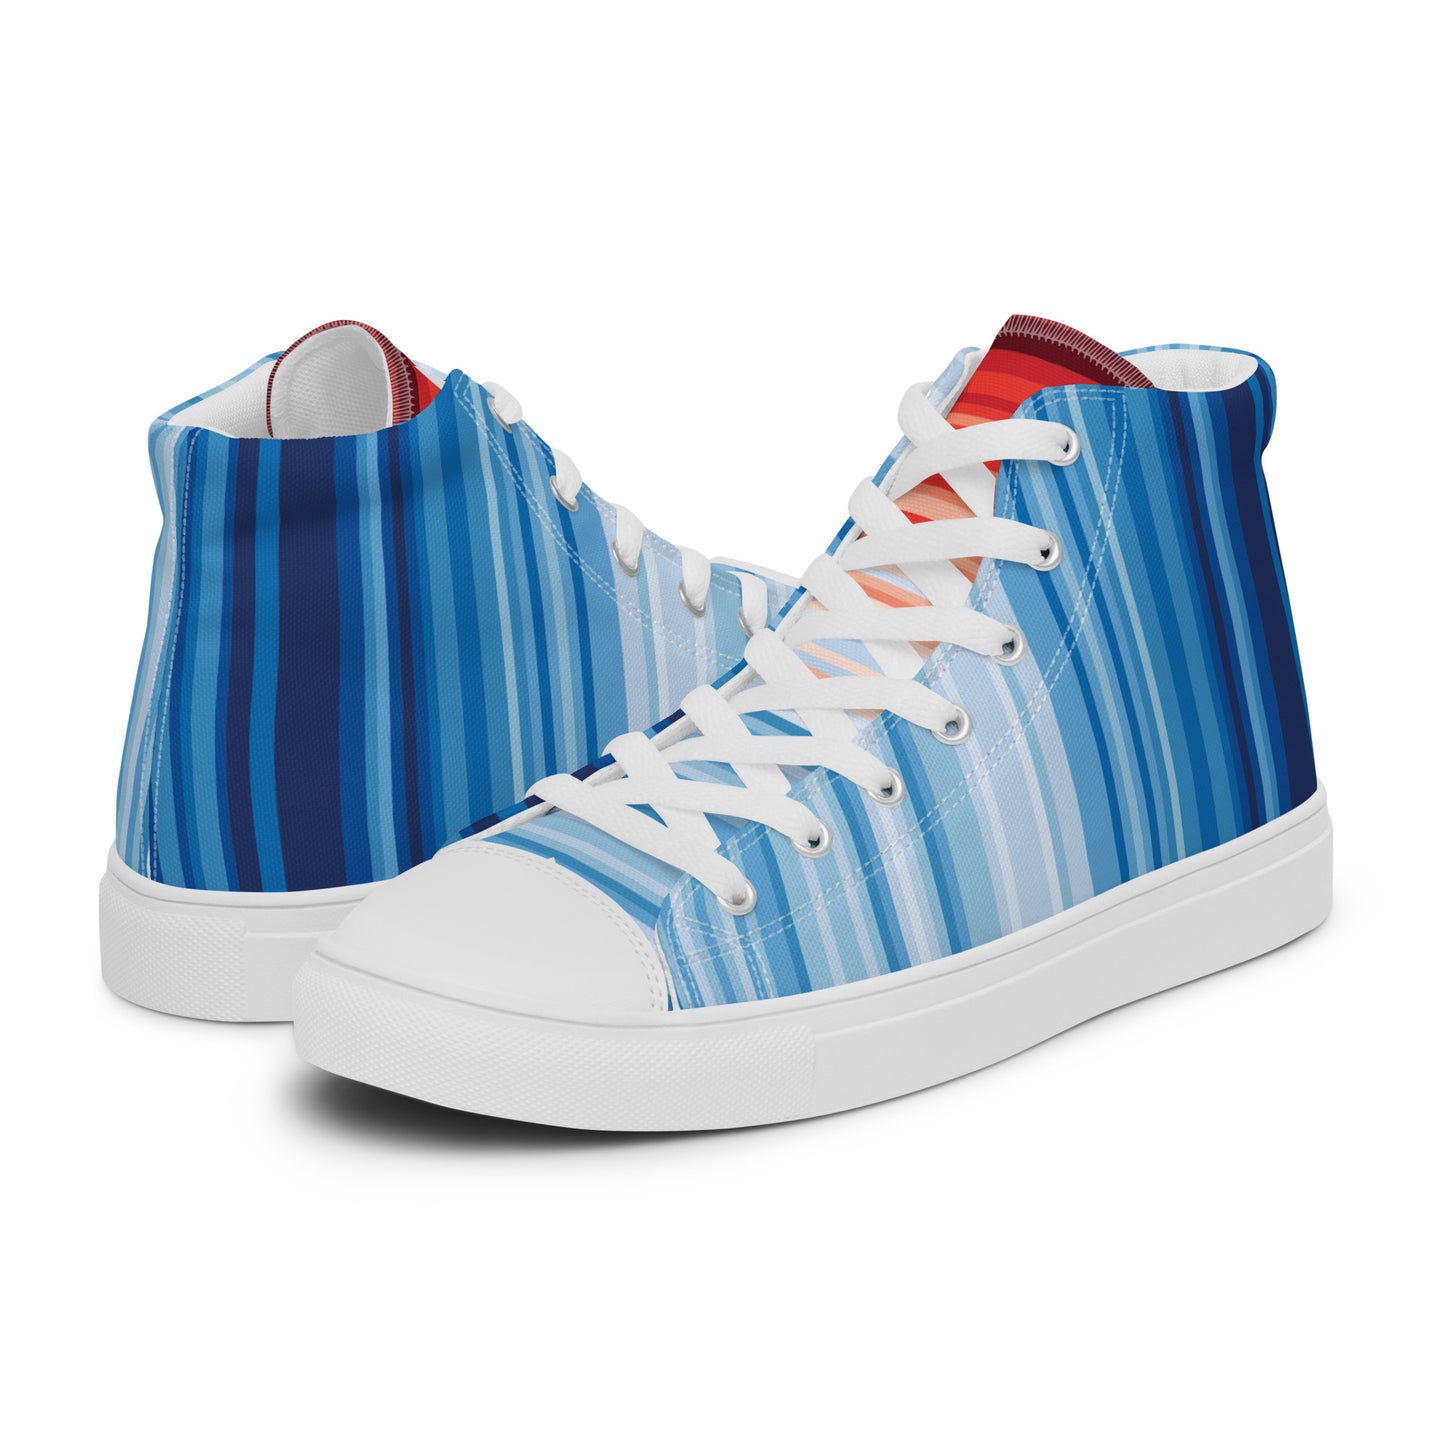 Climate Change Global Warming Stripes - Sustainably Made Women’s high top canvas shoes